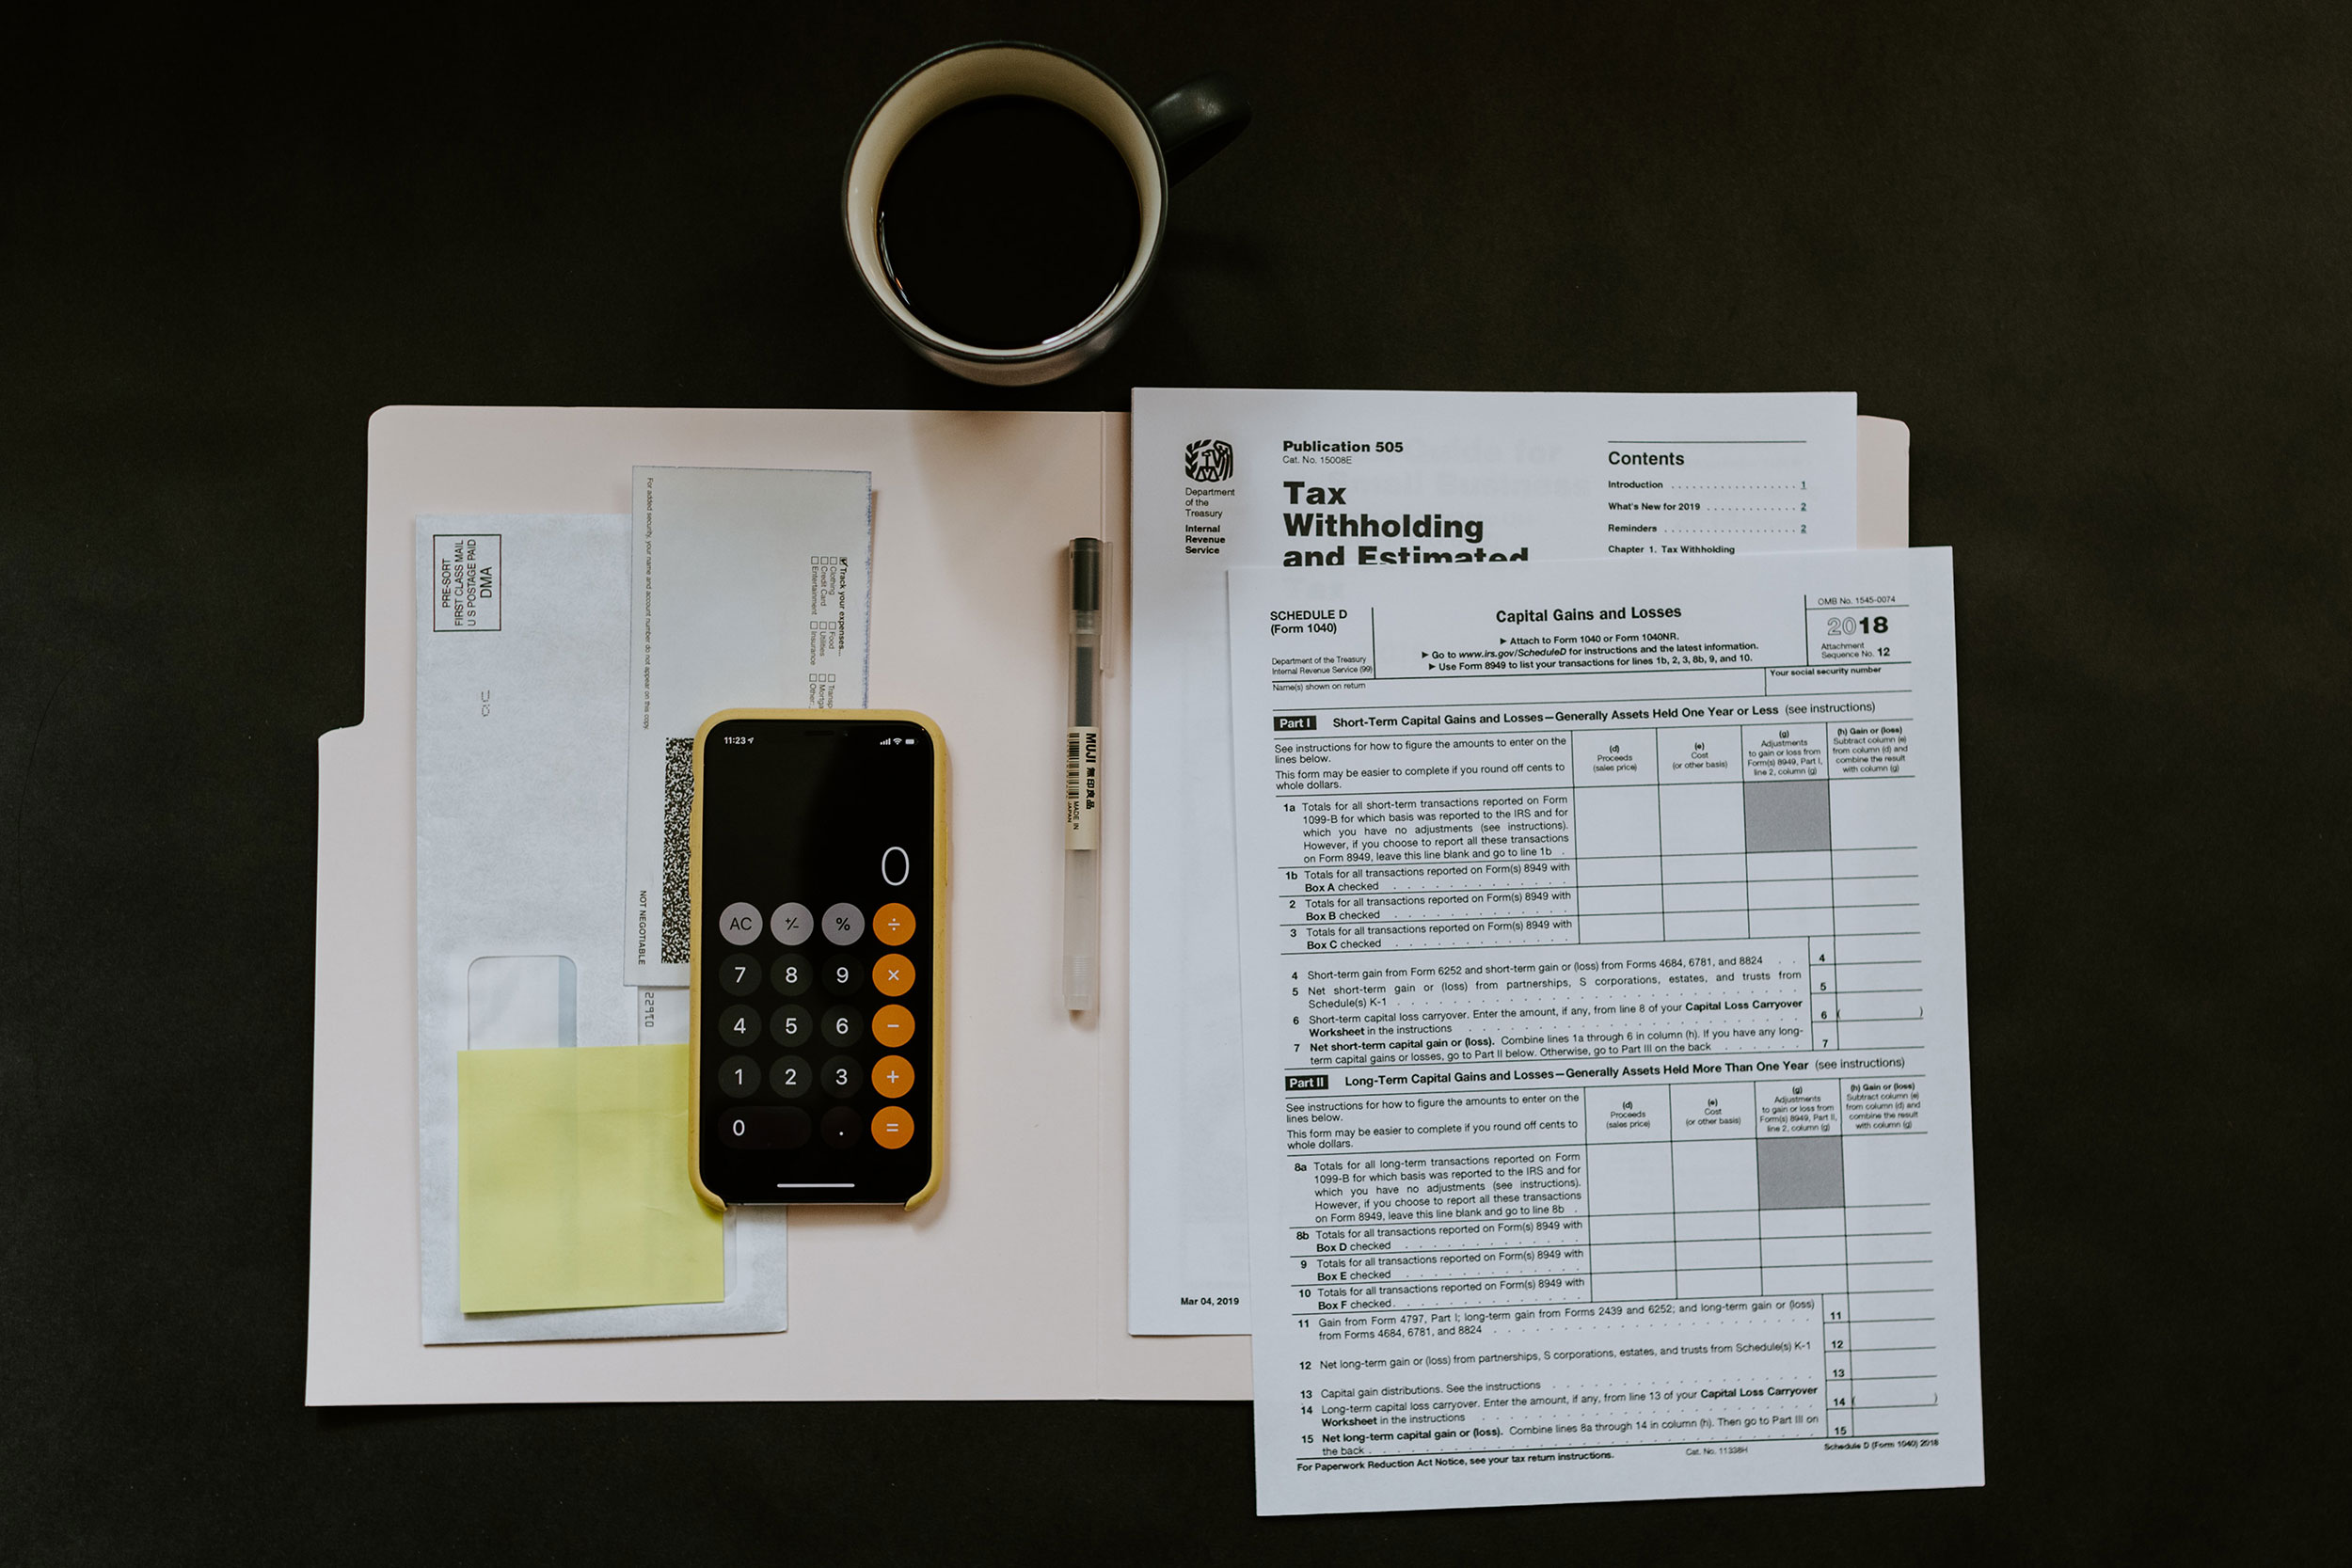 desk with a mug and a calculator sitting on an open folder revealing tax forms